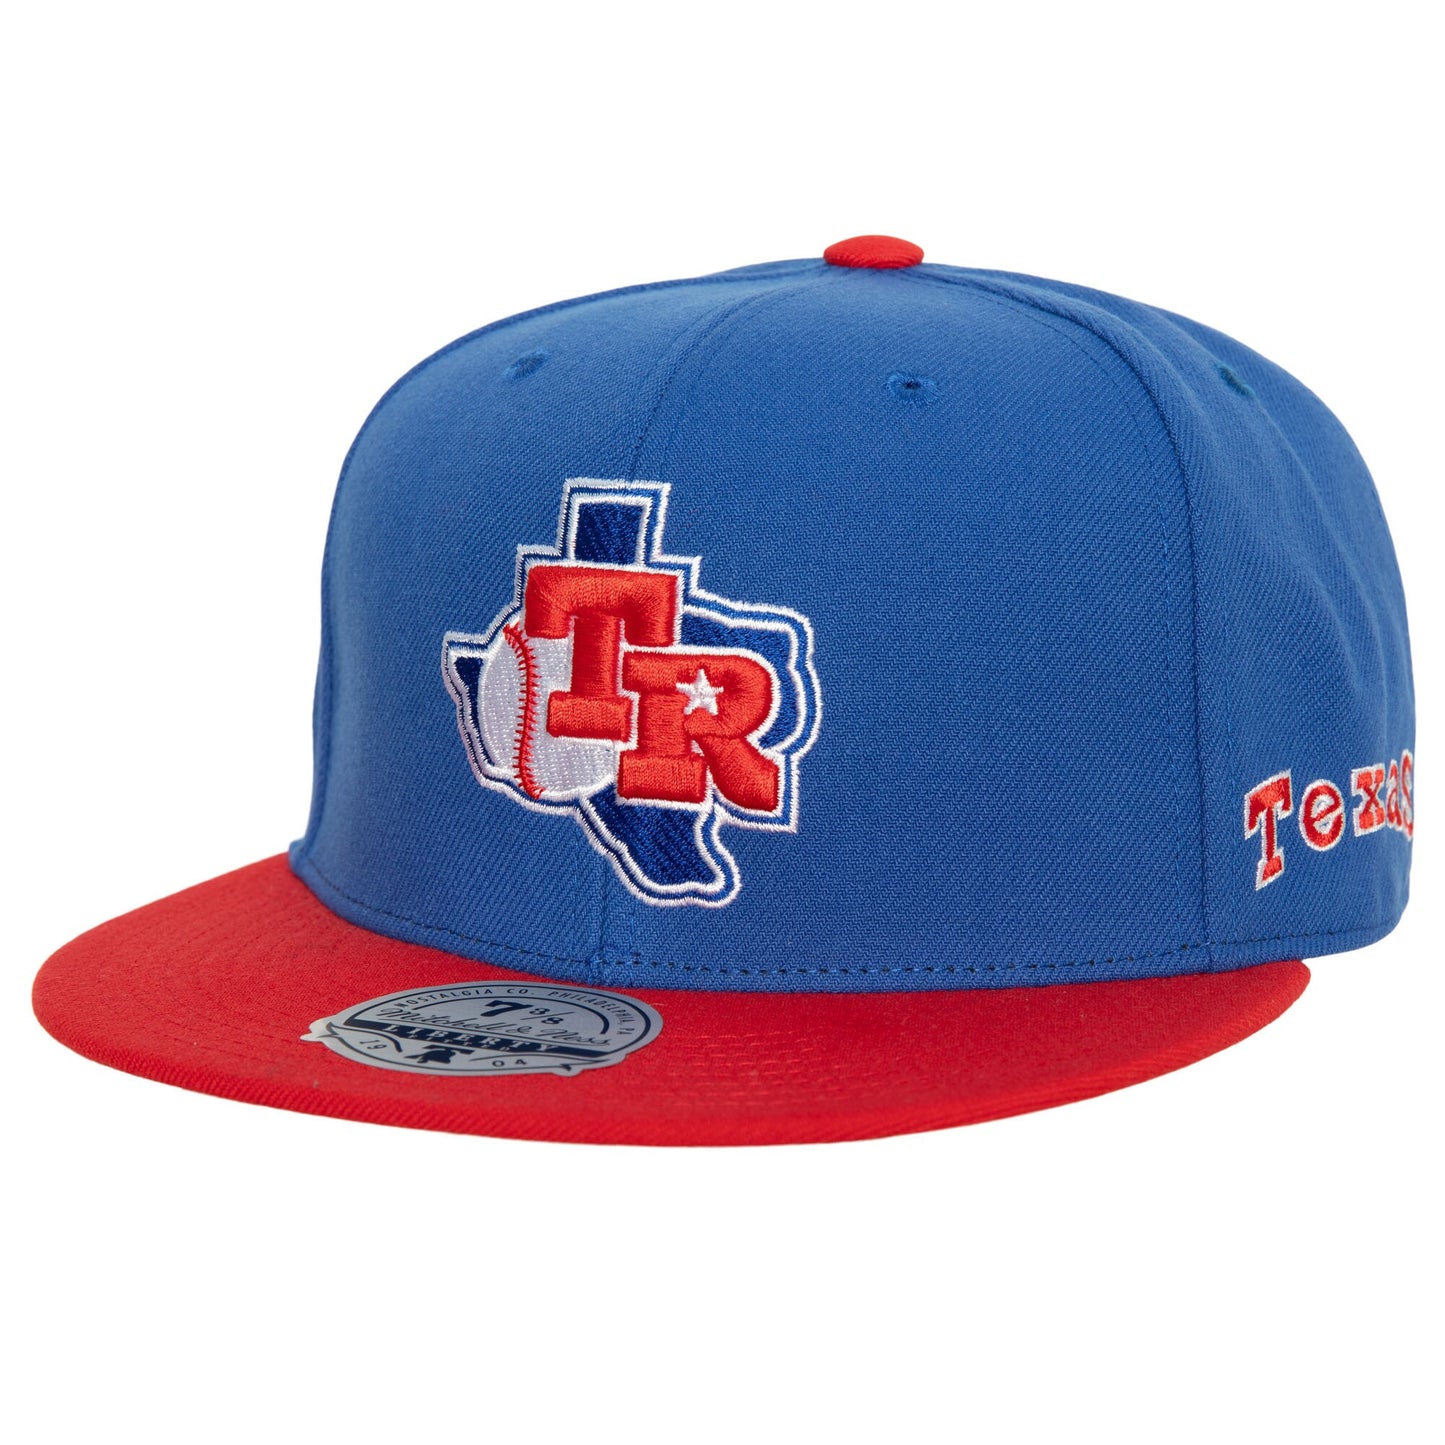 Texas Rangers Mitchell & Ness Bases Loaded Fitted Hat - Royal/Red